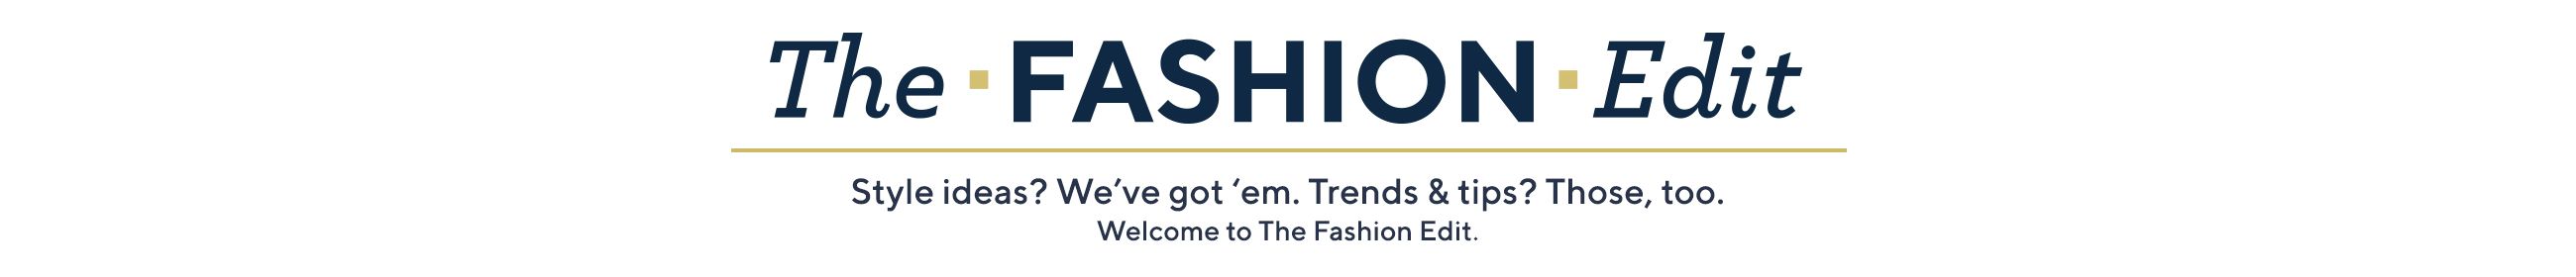 The Fashion Edit  Style ideas? We've got 'em. Trends & tips? Those, too Welcome to The Fashion Edit.